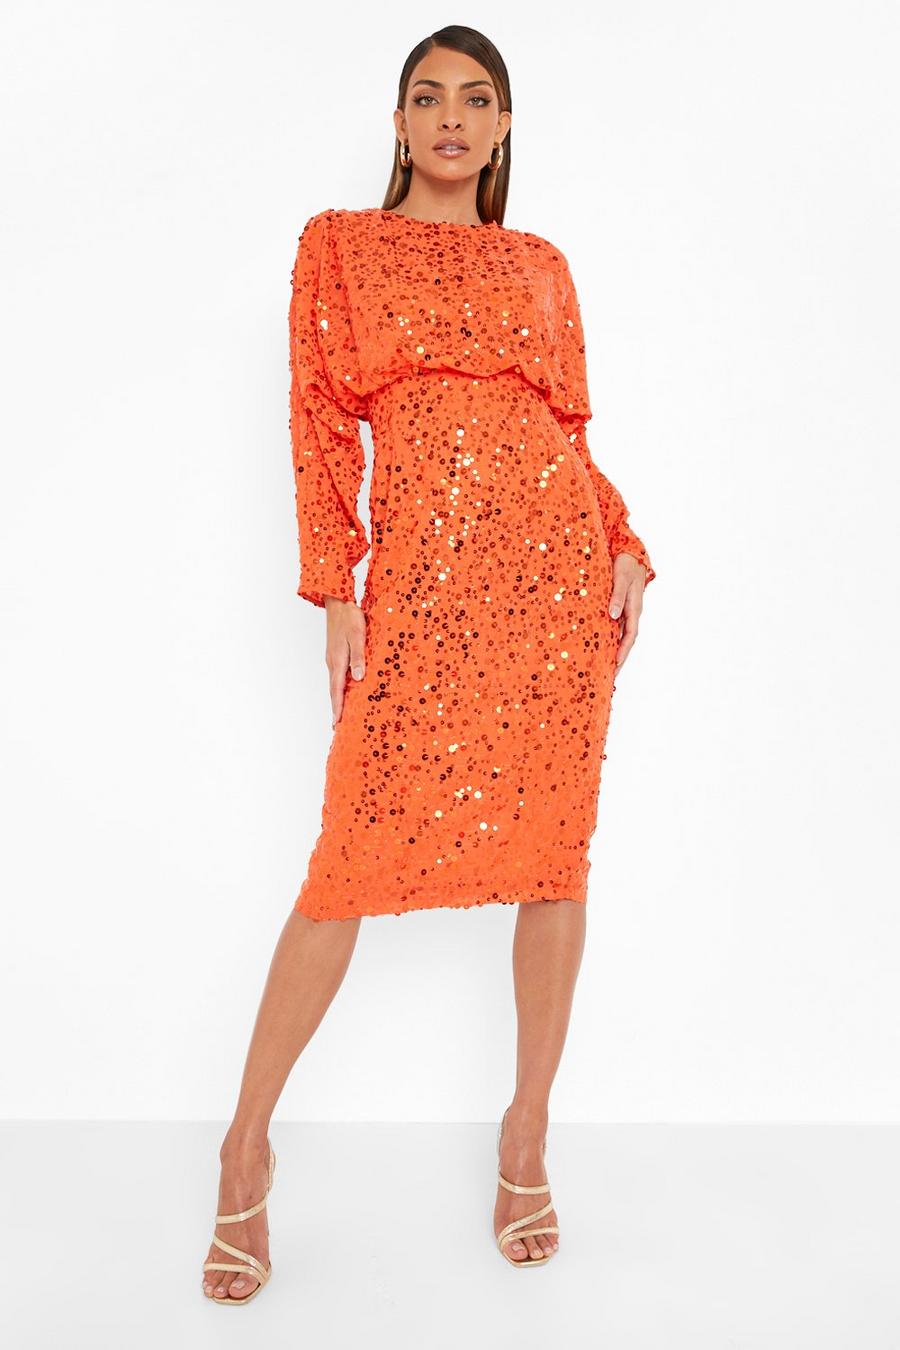 Sequin dress with sleeve - Buy and Slay